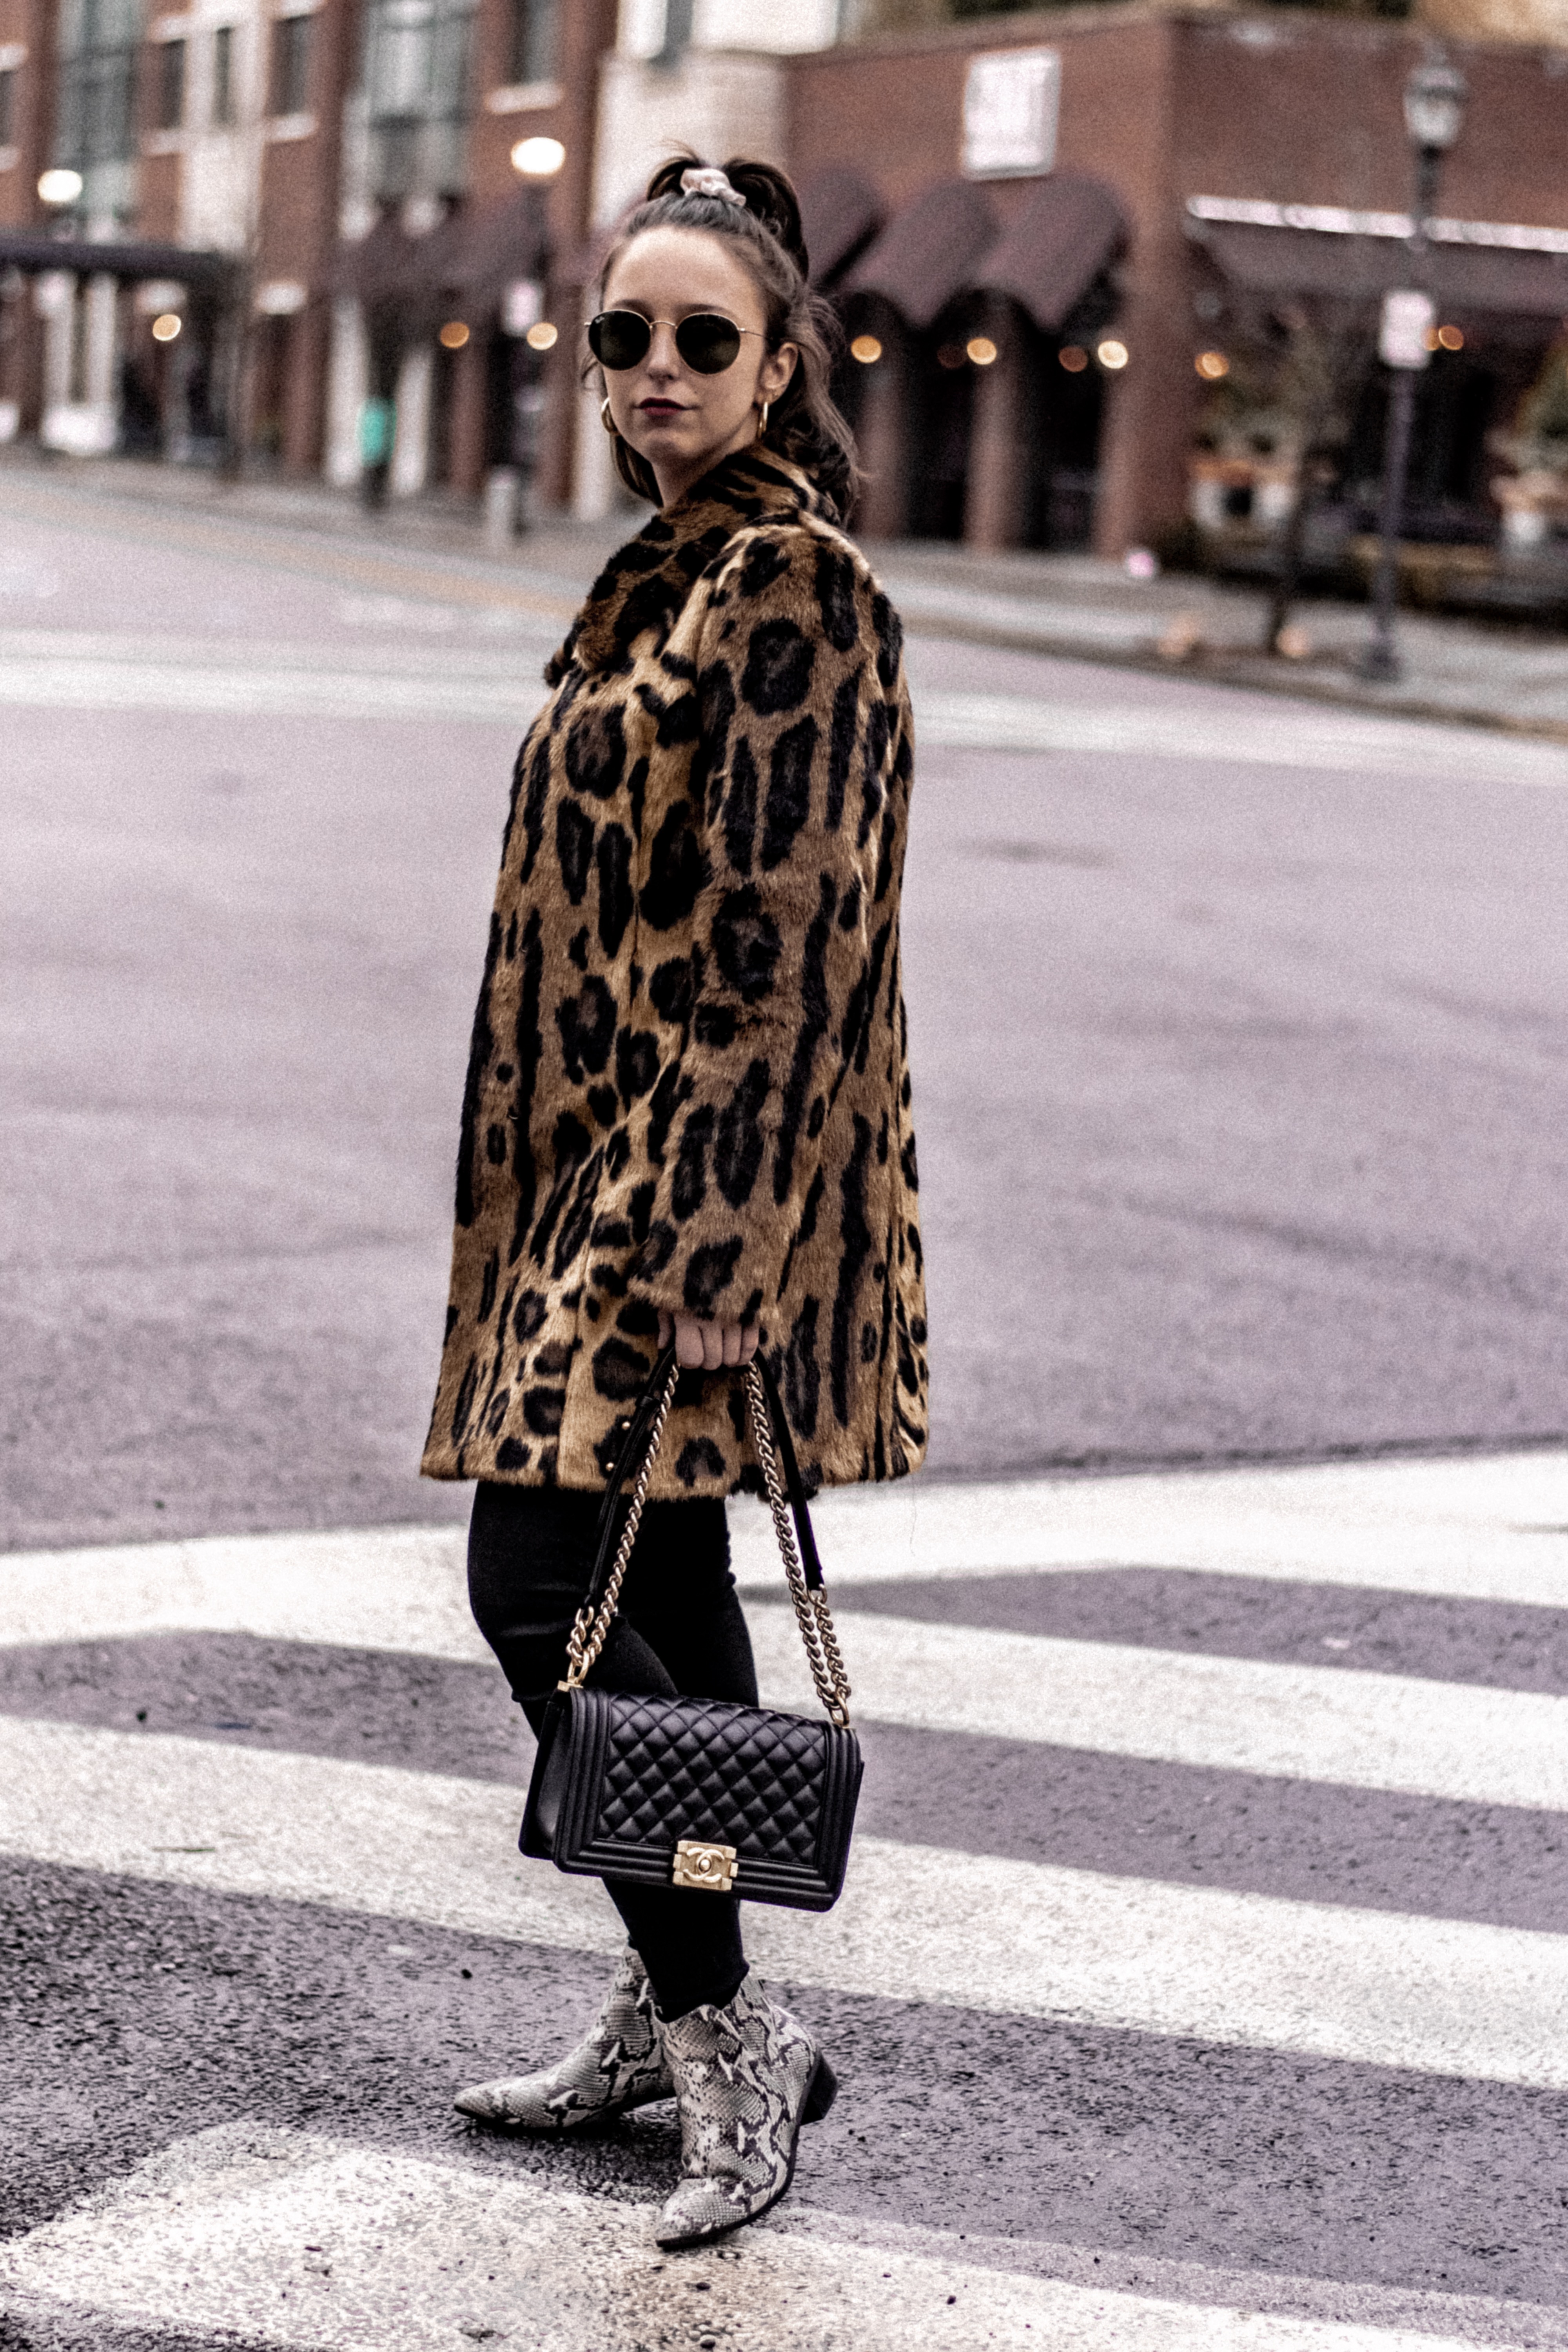 Fashion Accessories Under $100 to Grab in 2019- #accessories #fashion #fashiontrends #trends #hair #beauty #style #blogger #shopping #outfit #winteroutfit #shopthepost #leopardcoat #chanelbag #neon #snakeskin 